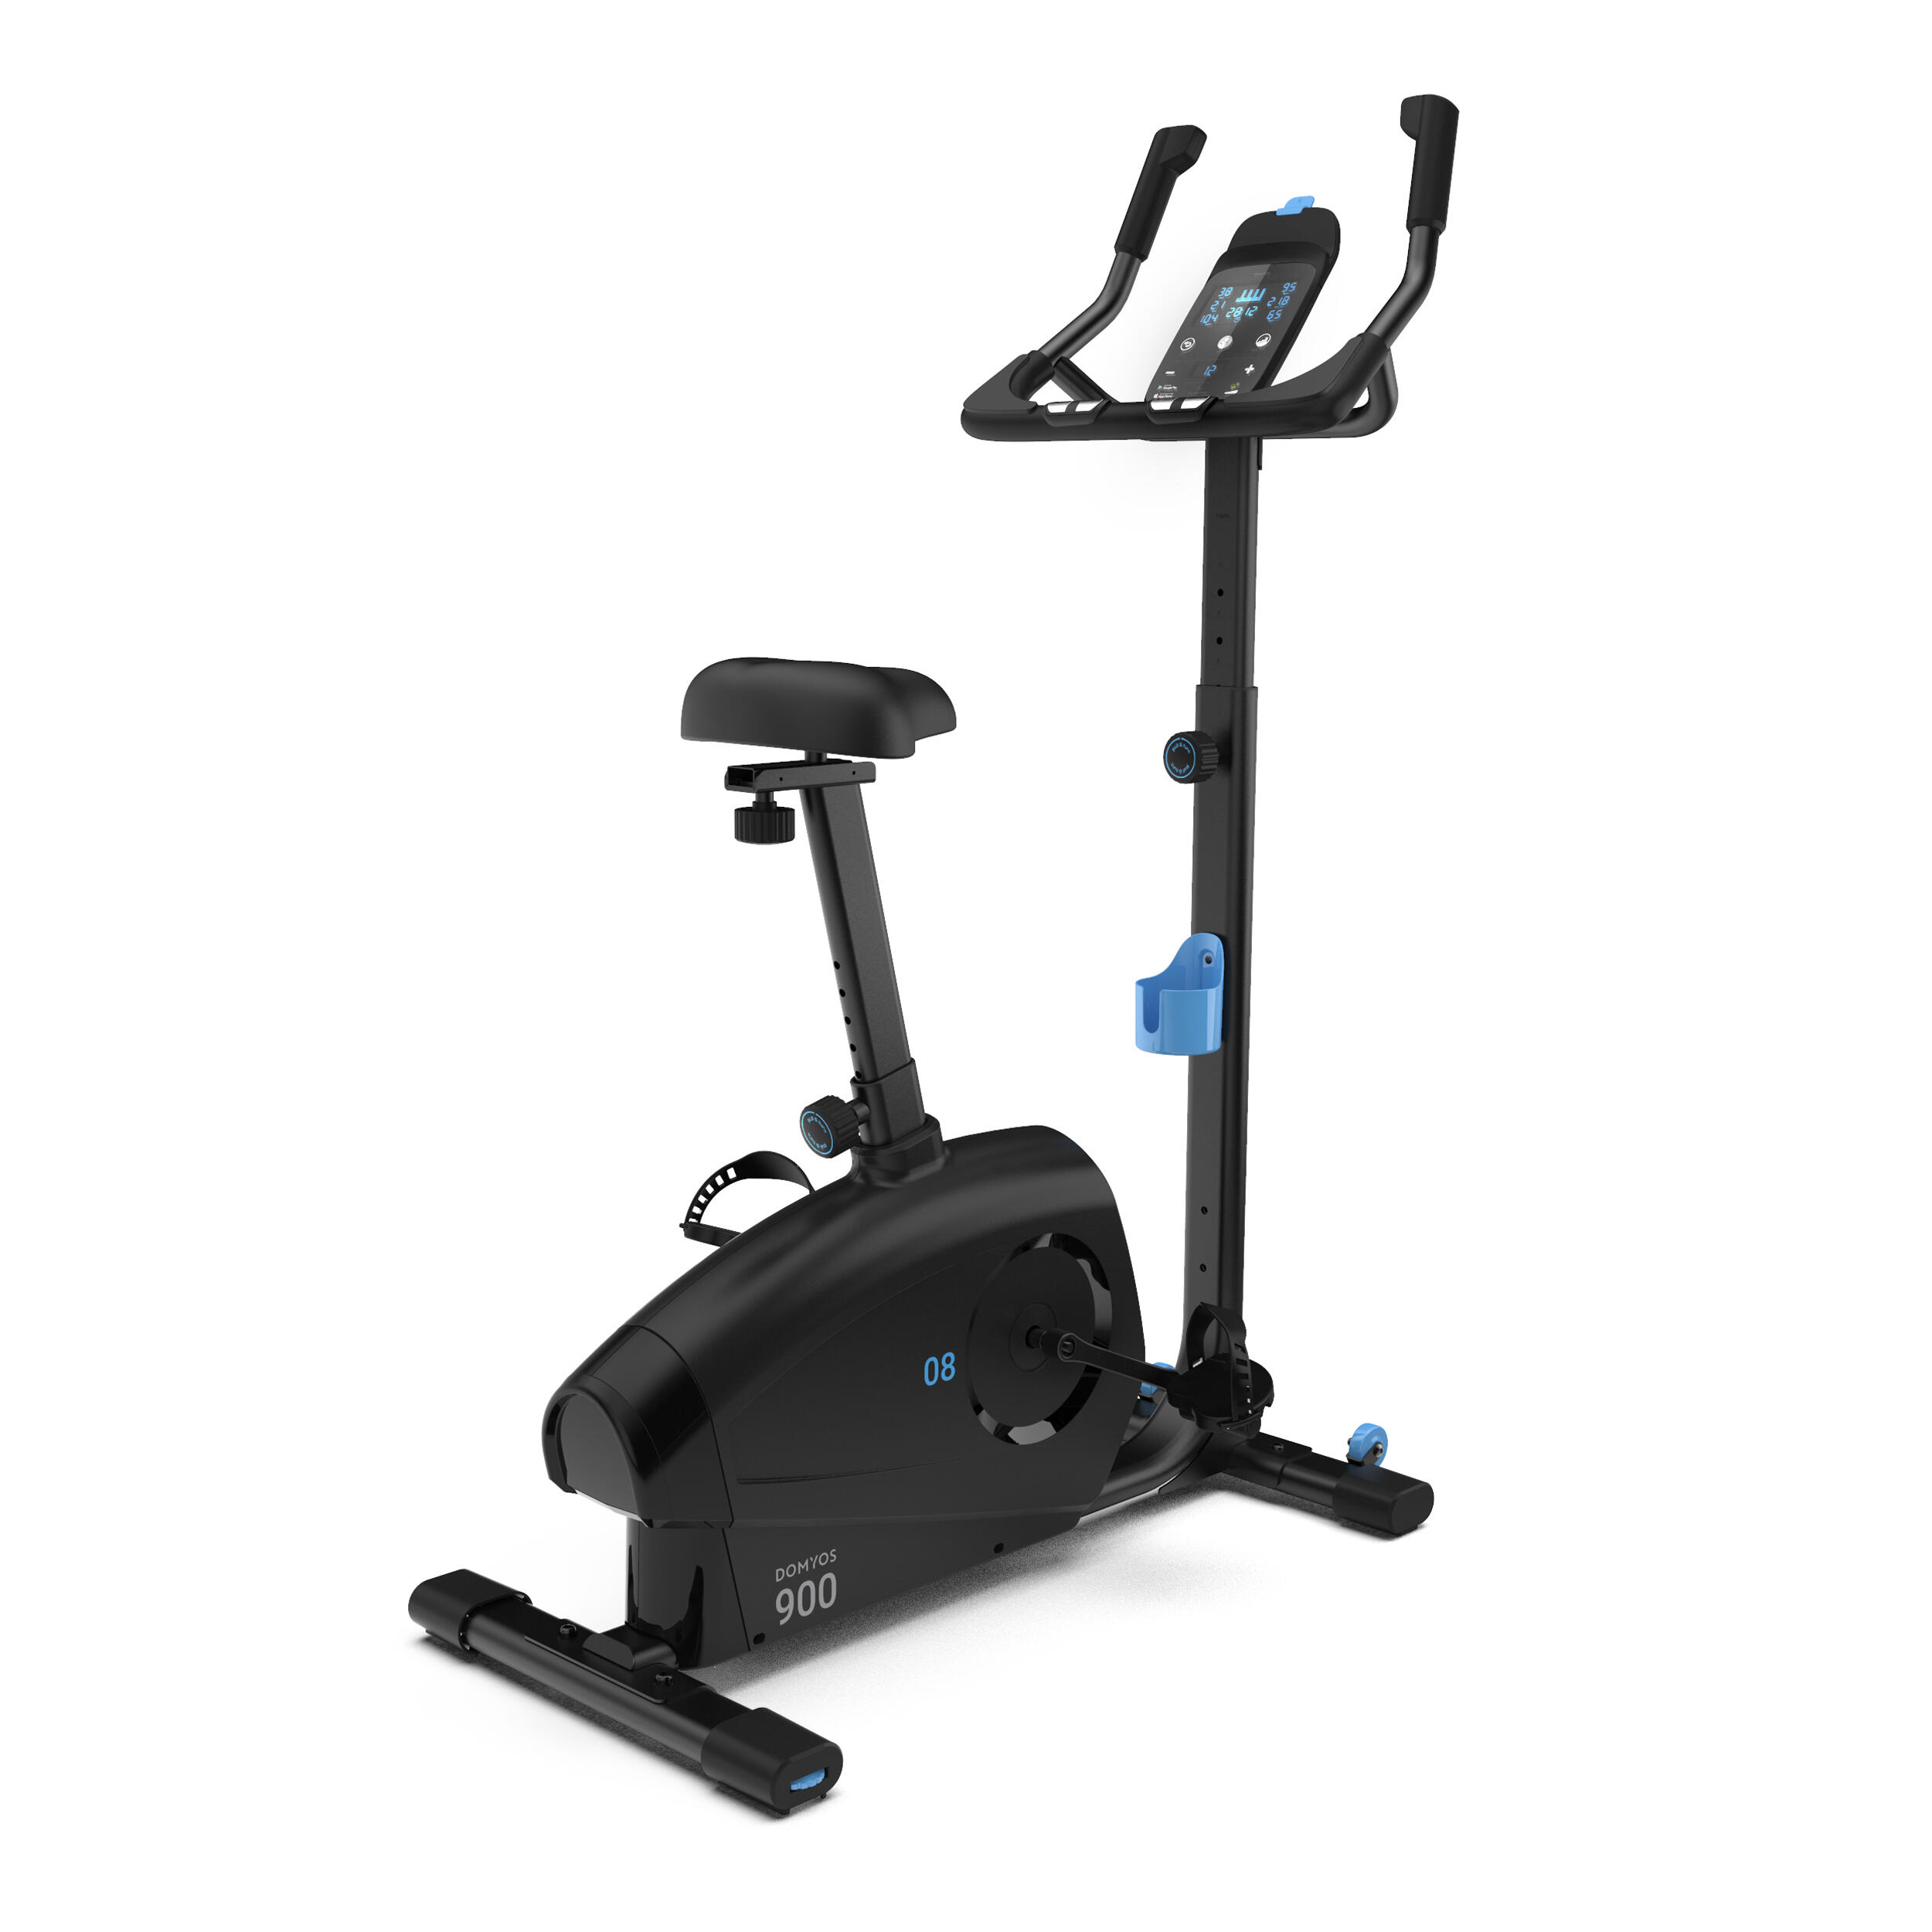 DOMYOS Self-Powered Exercise Bike 900 Connected to Coaching Apps